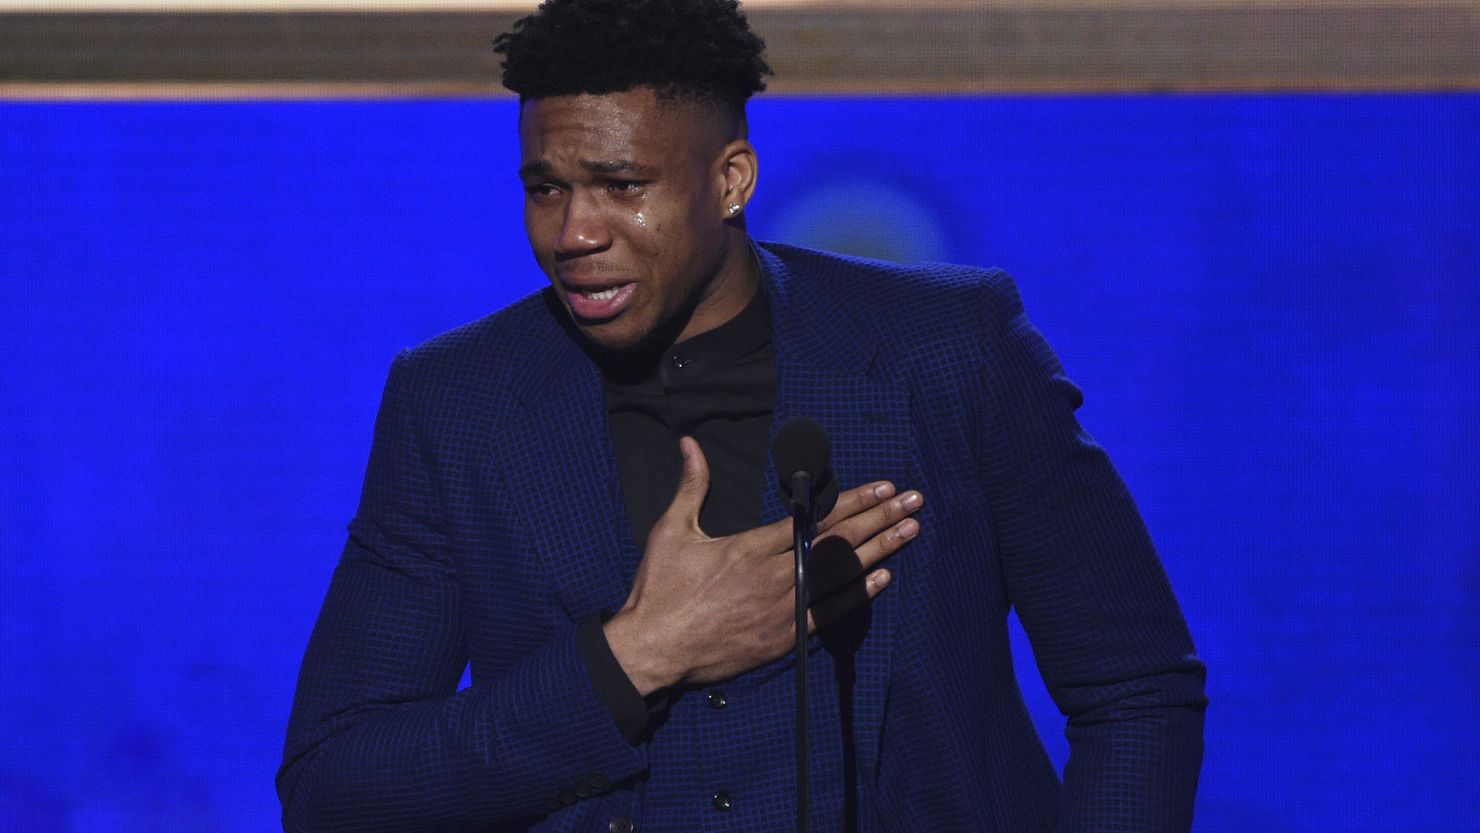 Giannis Antetokounmpo, of the Milwaukee Bucks, reacts as he accepts the most valuable player award at the NBA Awards on Monday.